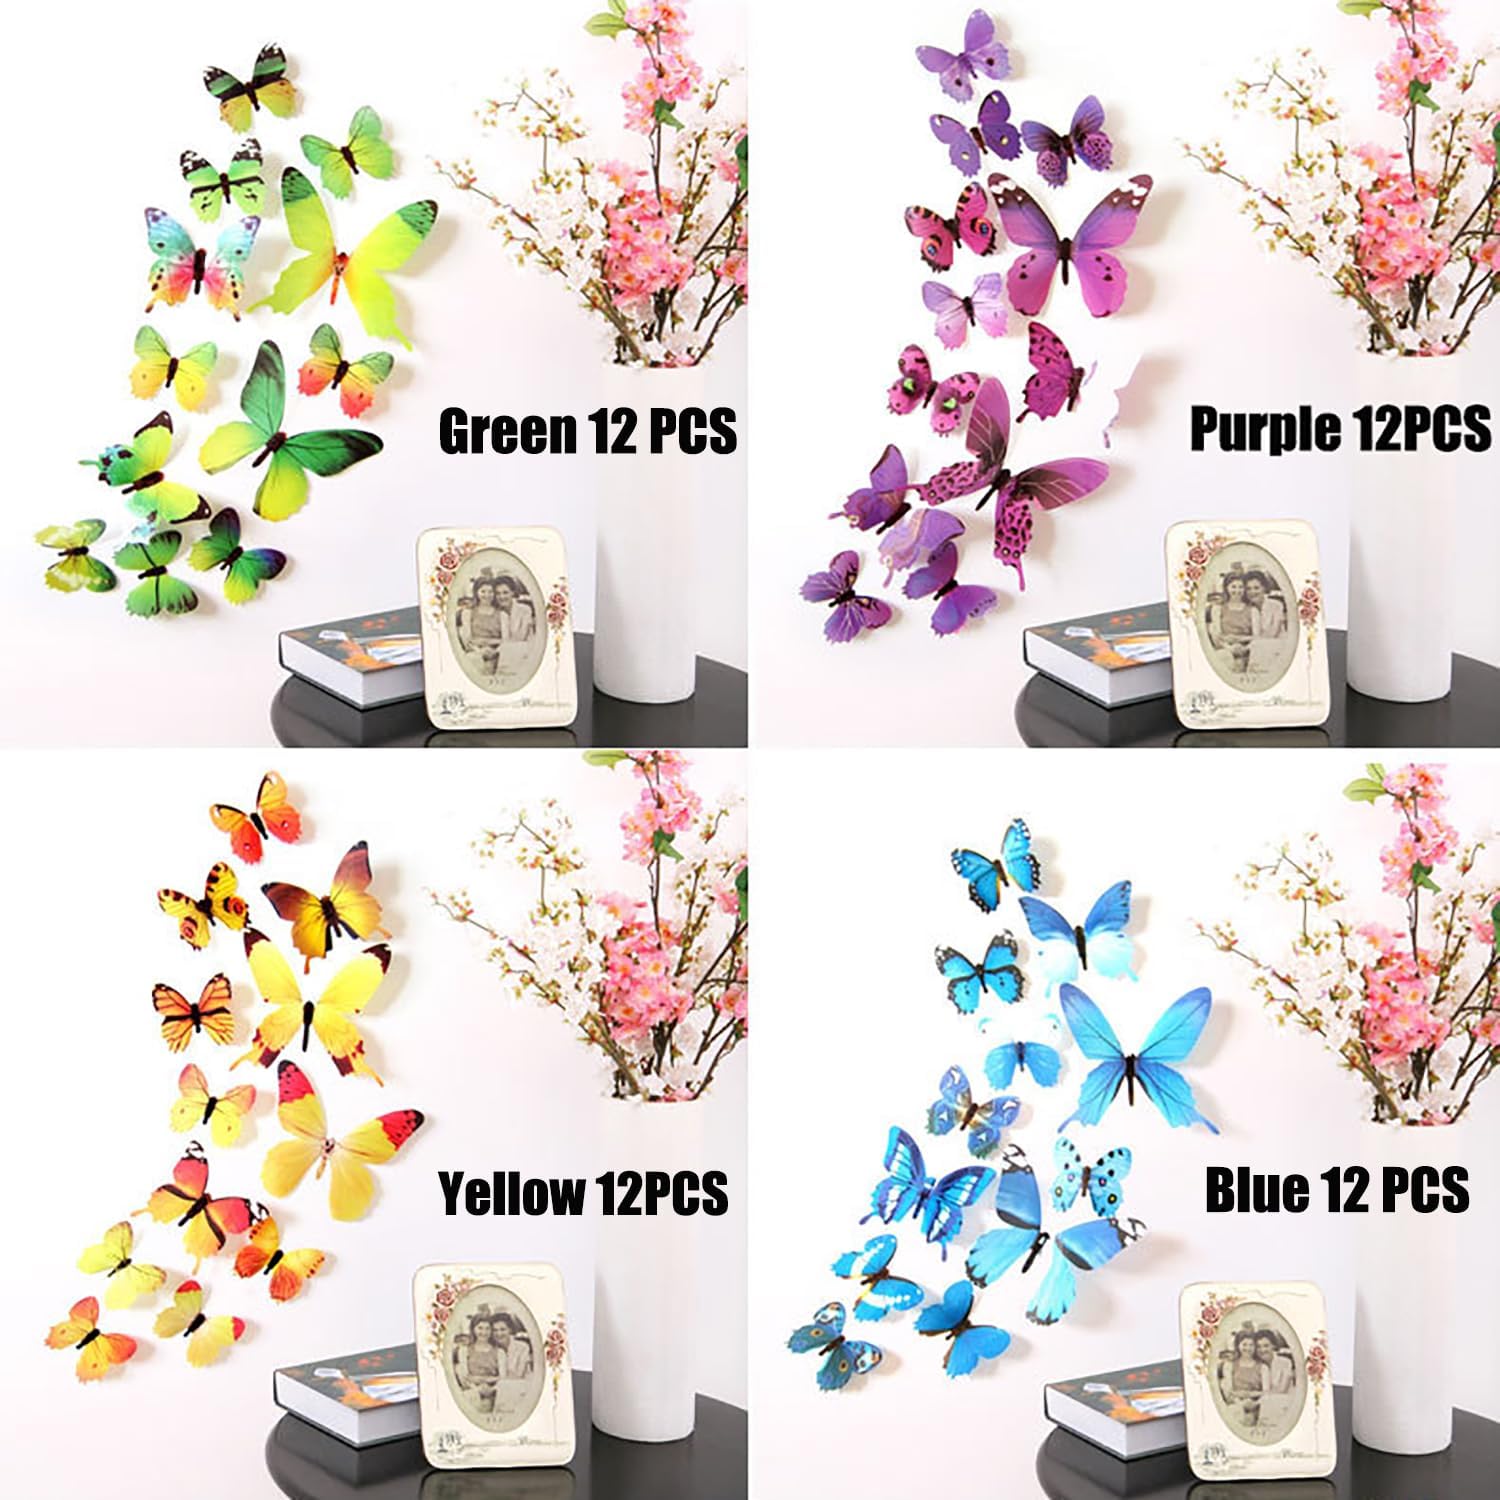 48PCS Butterfly Wall Decals Room Decor Wall Art 3D Butterflies Mural Sticker Home Decoration Kid Girl Bedroom Bathroom Nursery Classroom Office Party Removable Decorative